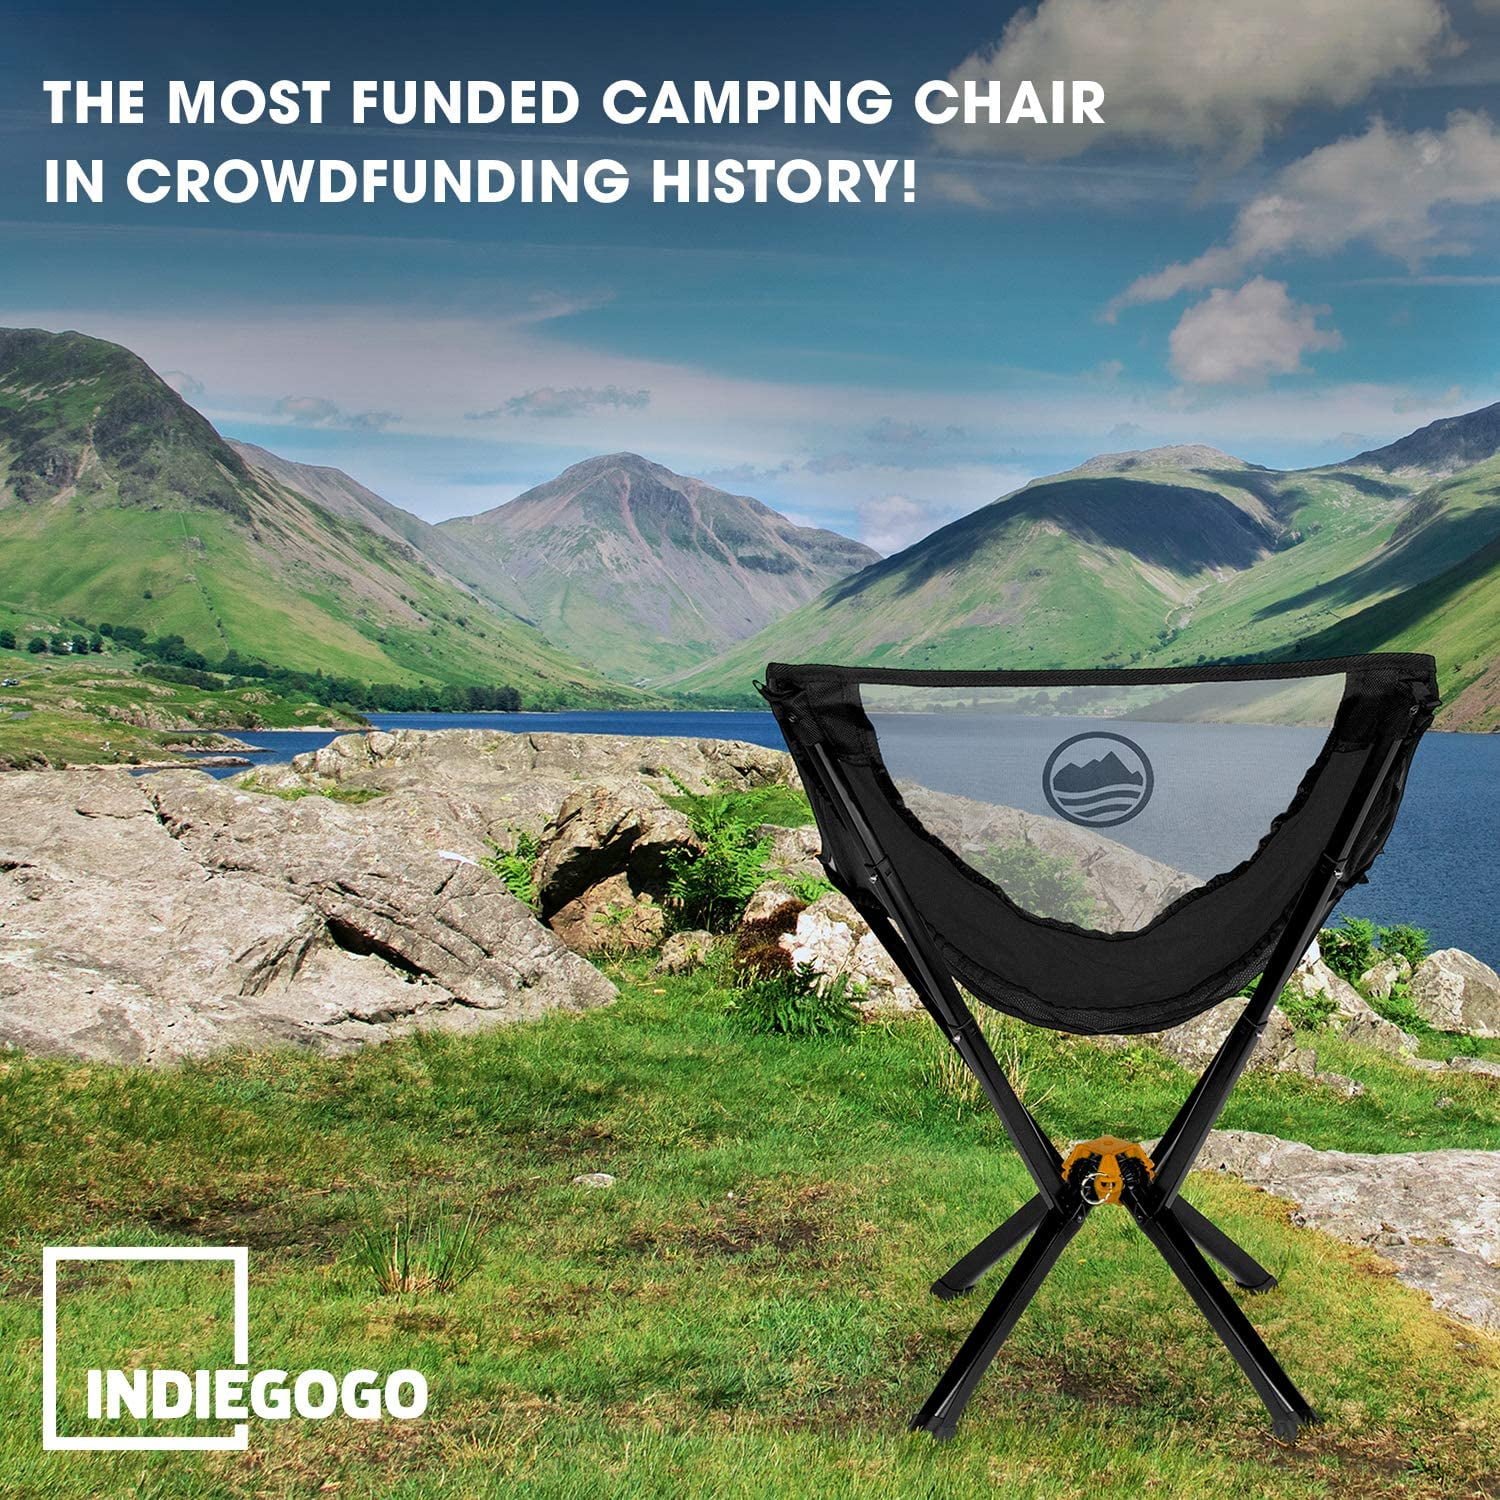 Cliq Camping Chair - Most Funded Portable Chair in Crowdfunding 